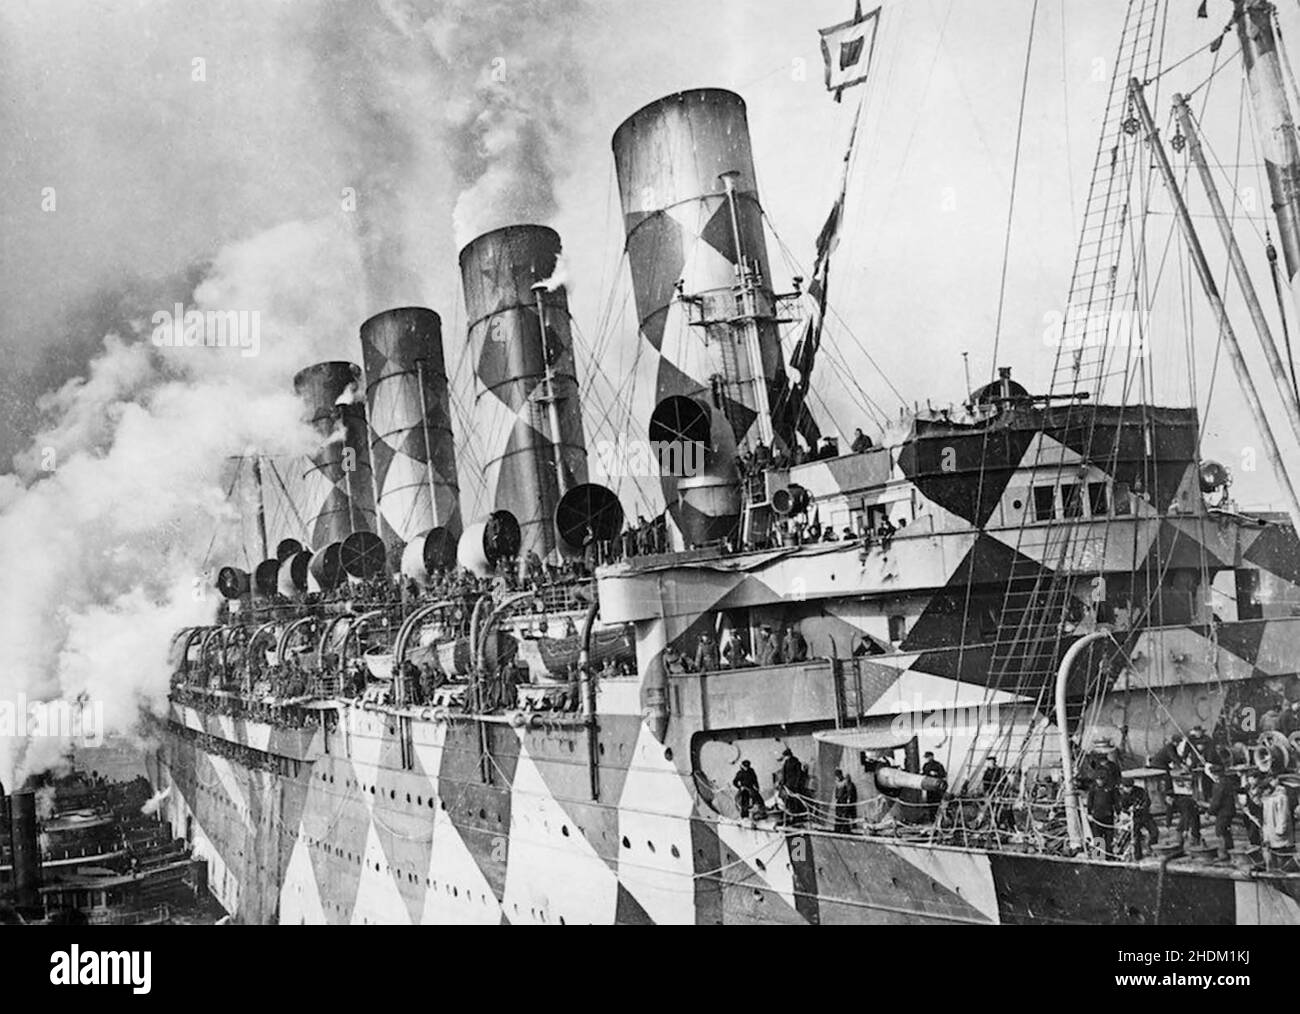 SHIPPING CAMOUFLAGE First World War. Former German ship Vaterland, renamed USS Leviathan, as a troop carrier in 1917. Stock Photo